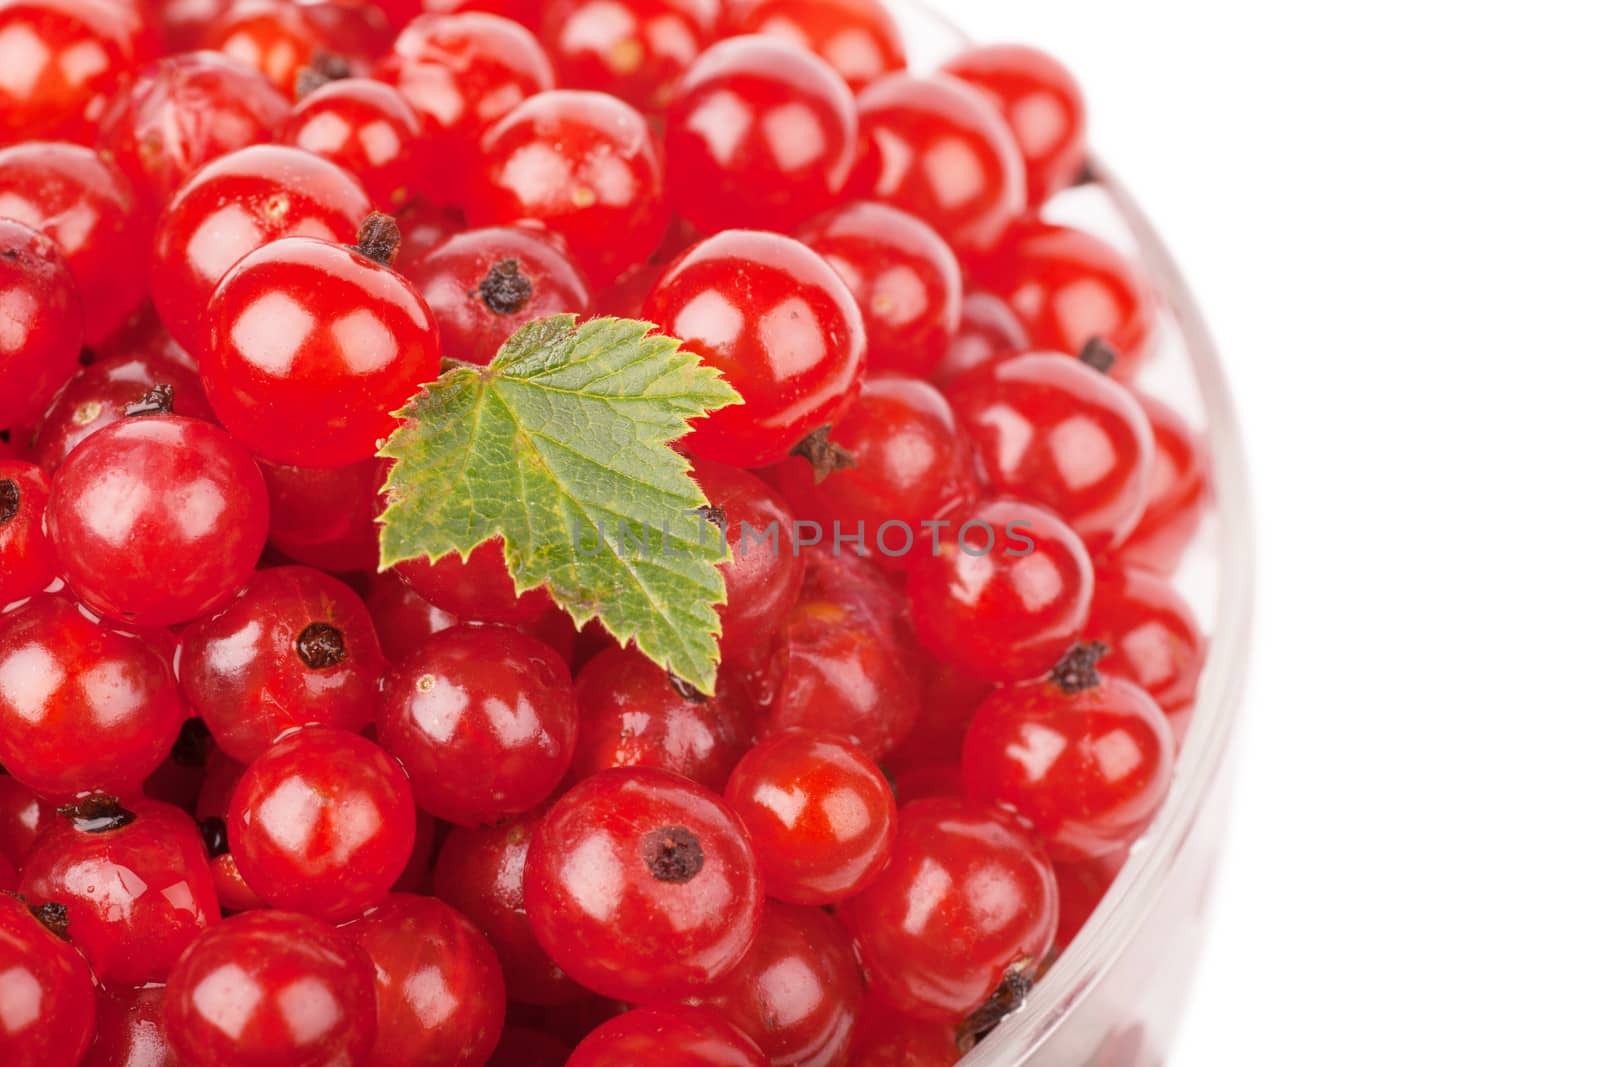 Red currants with green leaf over white background